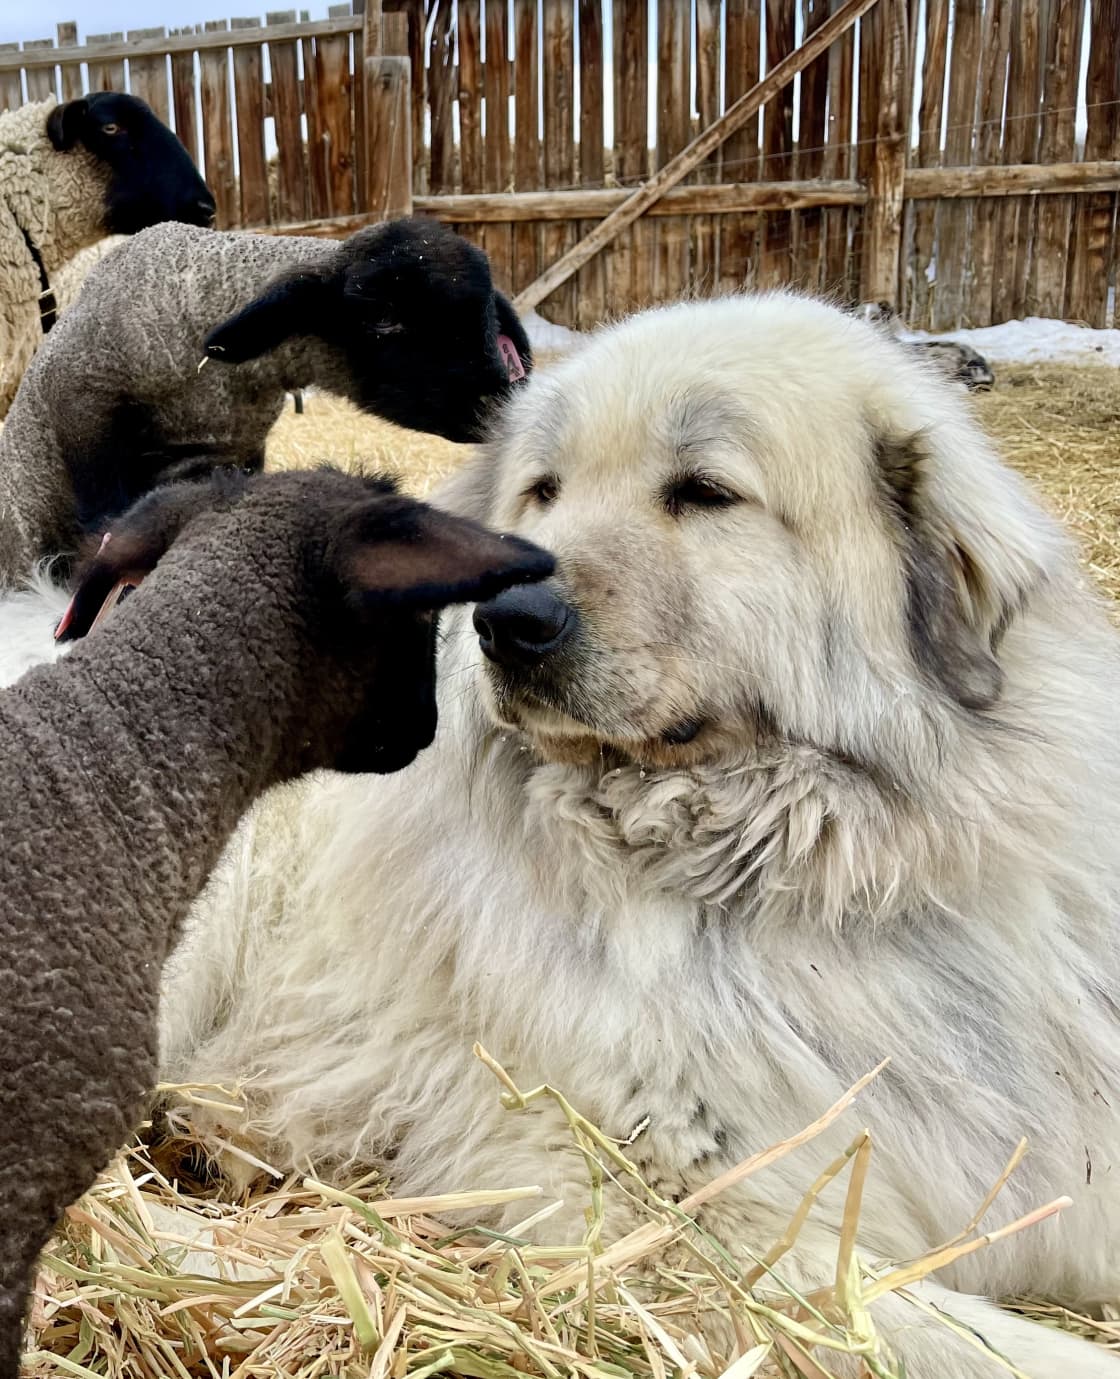 Our Great Pyrenees with a lamb